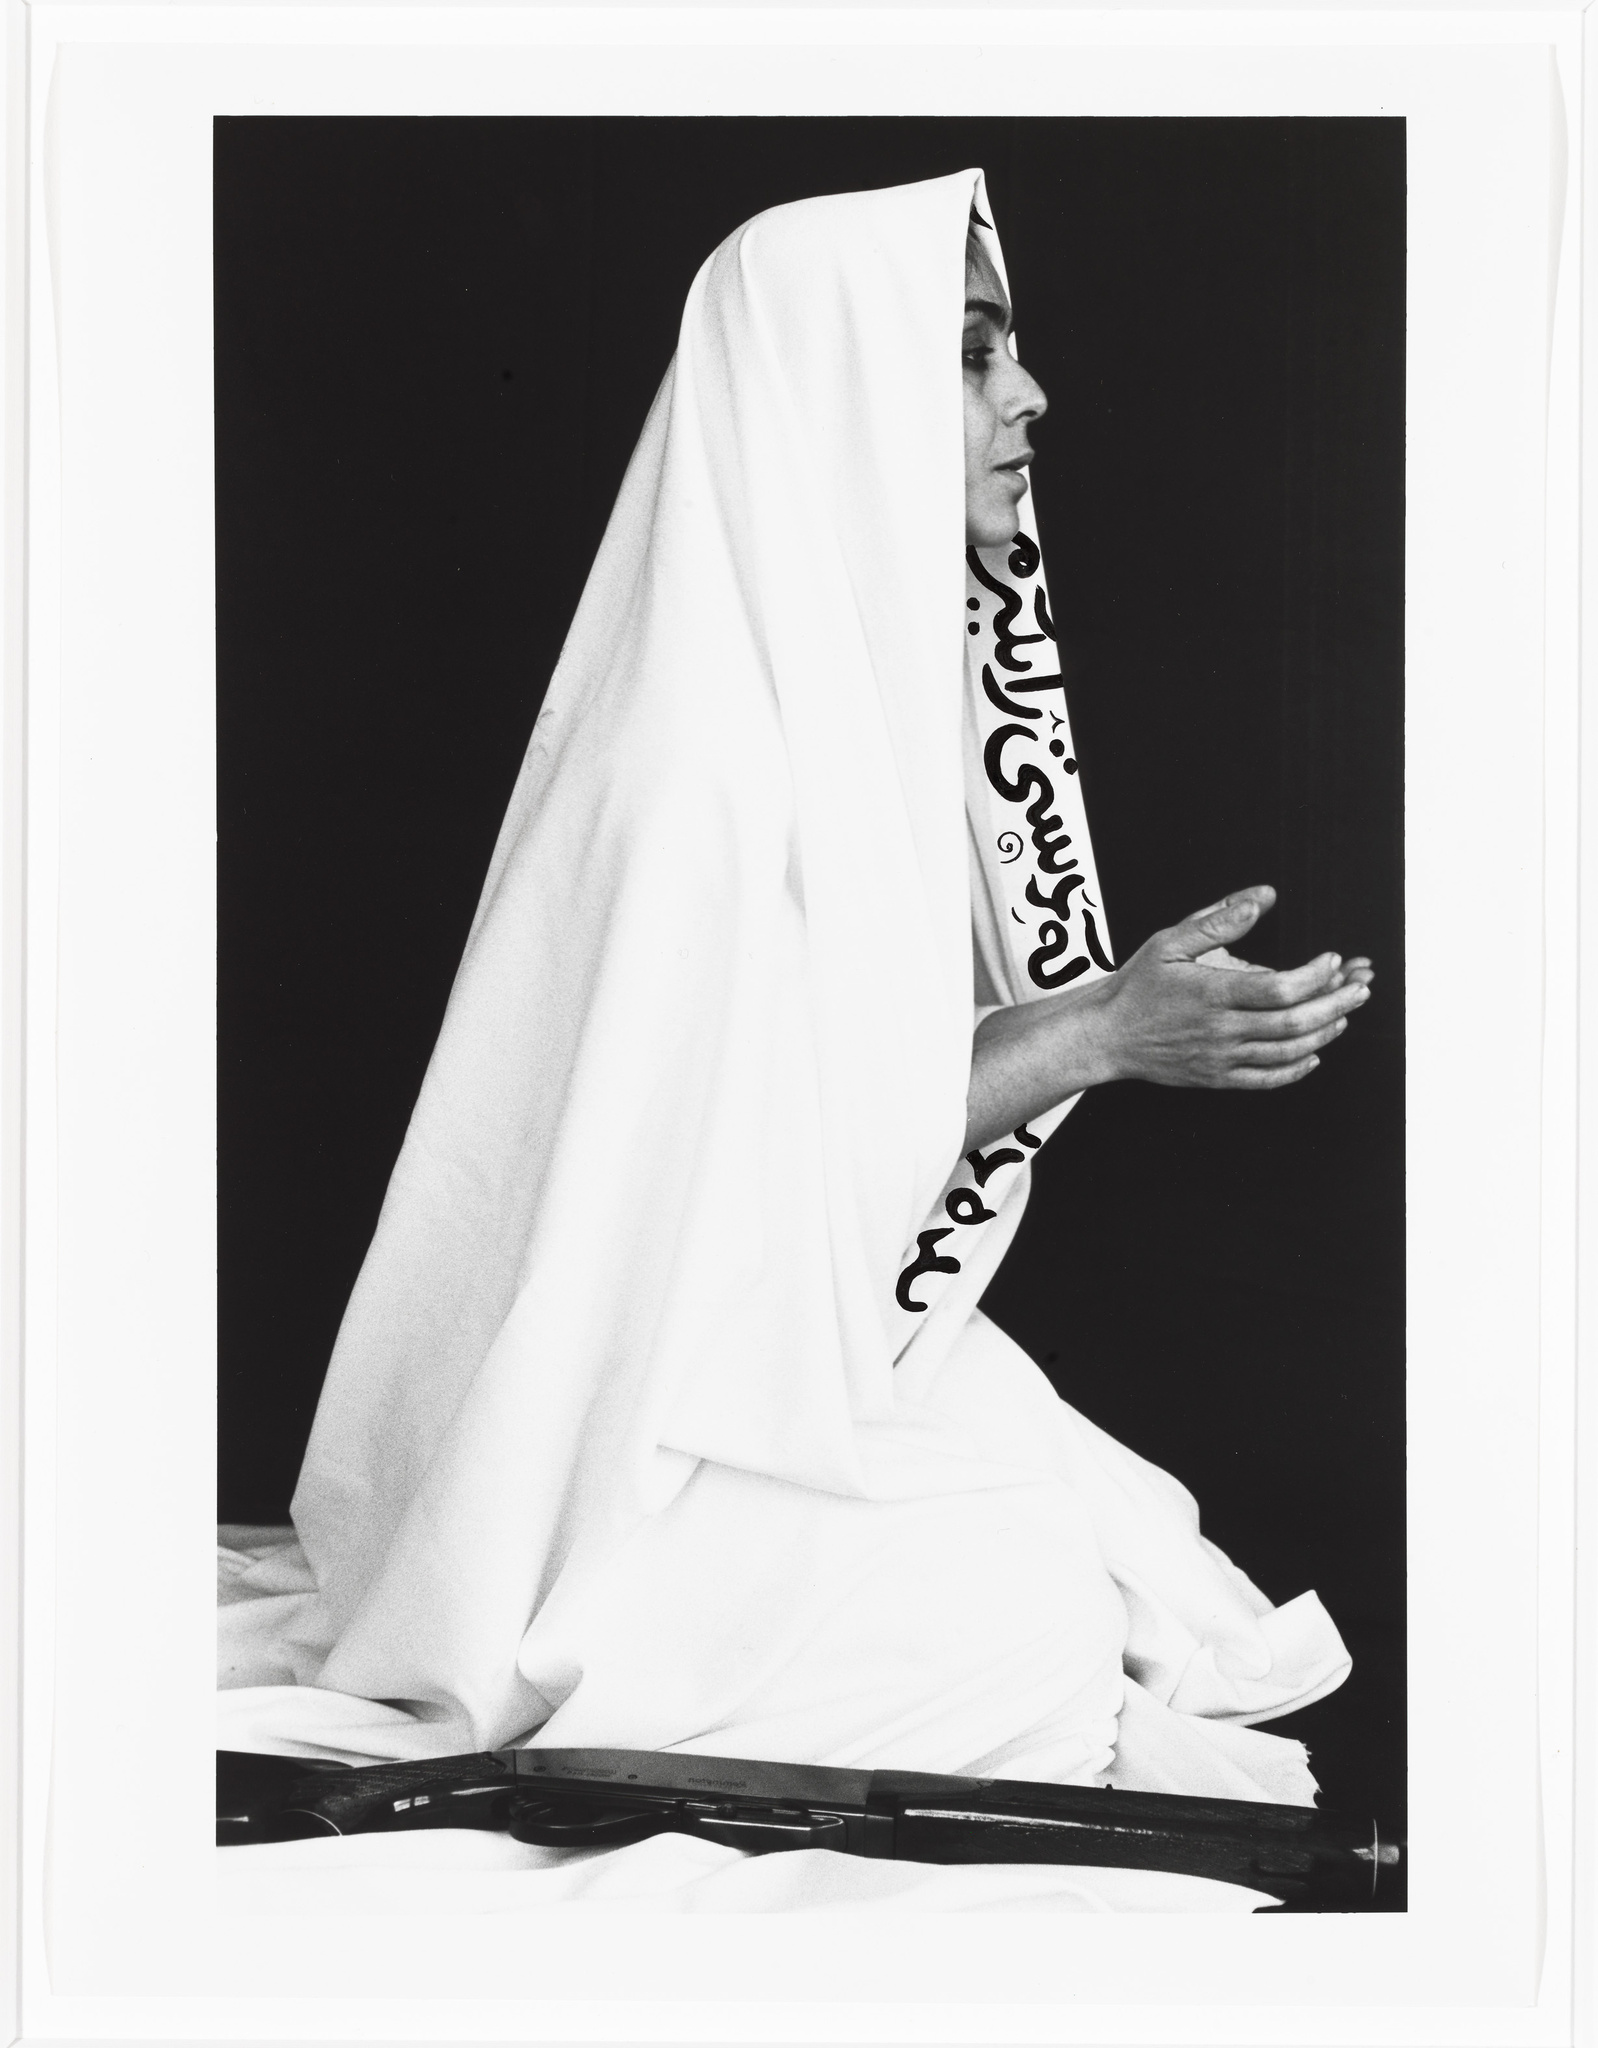 Seen from a profile view of a Iranian woman who is facing the right is wearing a white veil with Farsi text, has her hands in a prayer position, and has a gun near her bended knees 